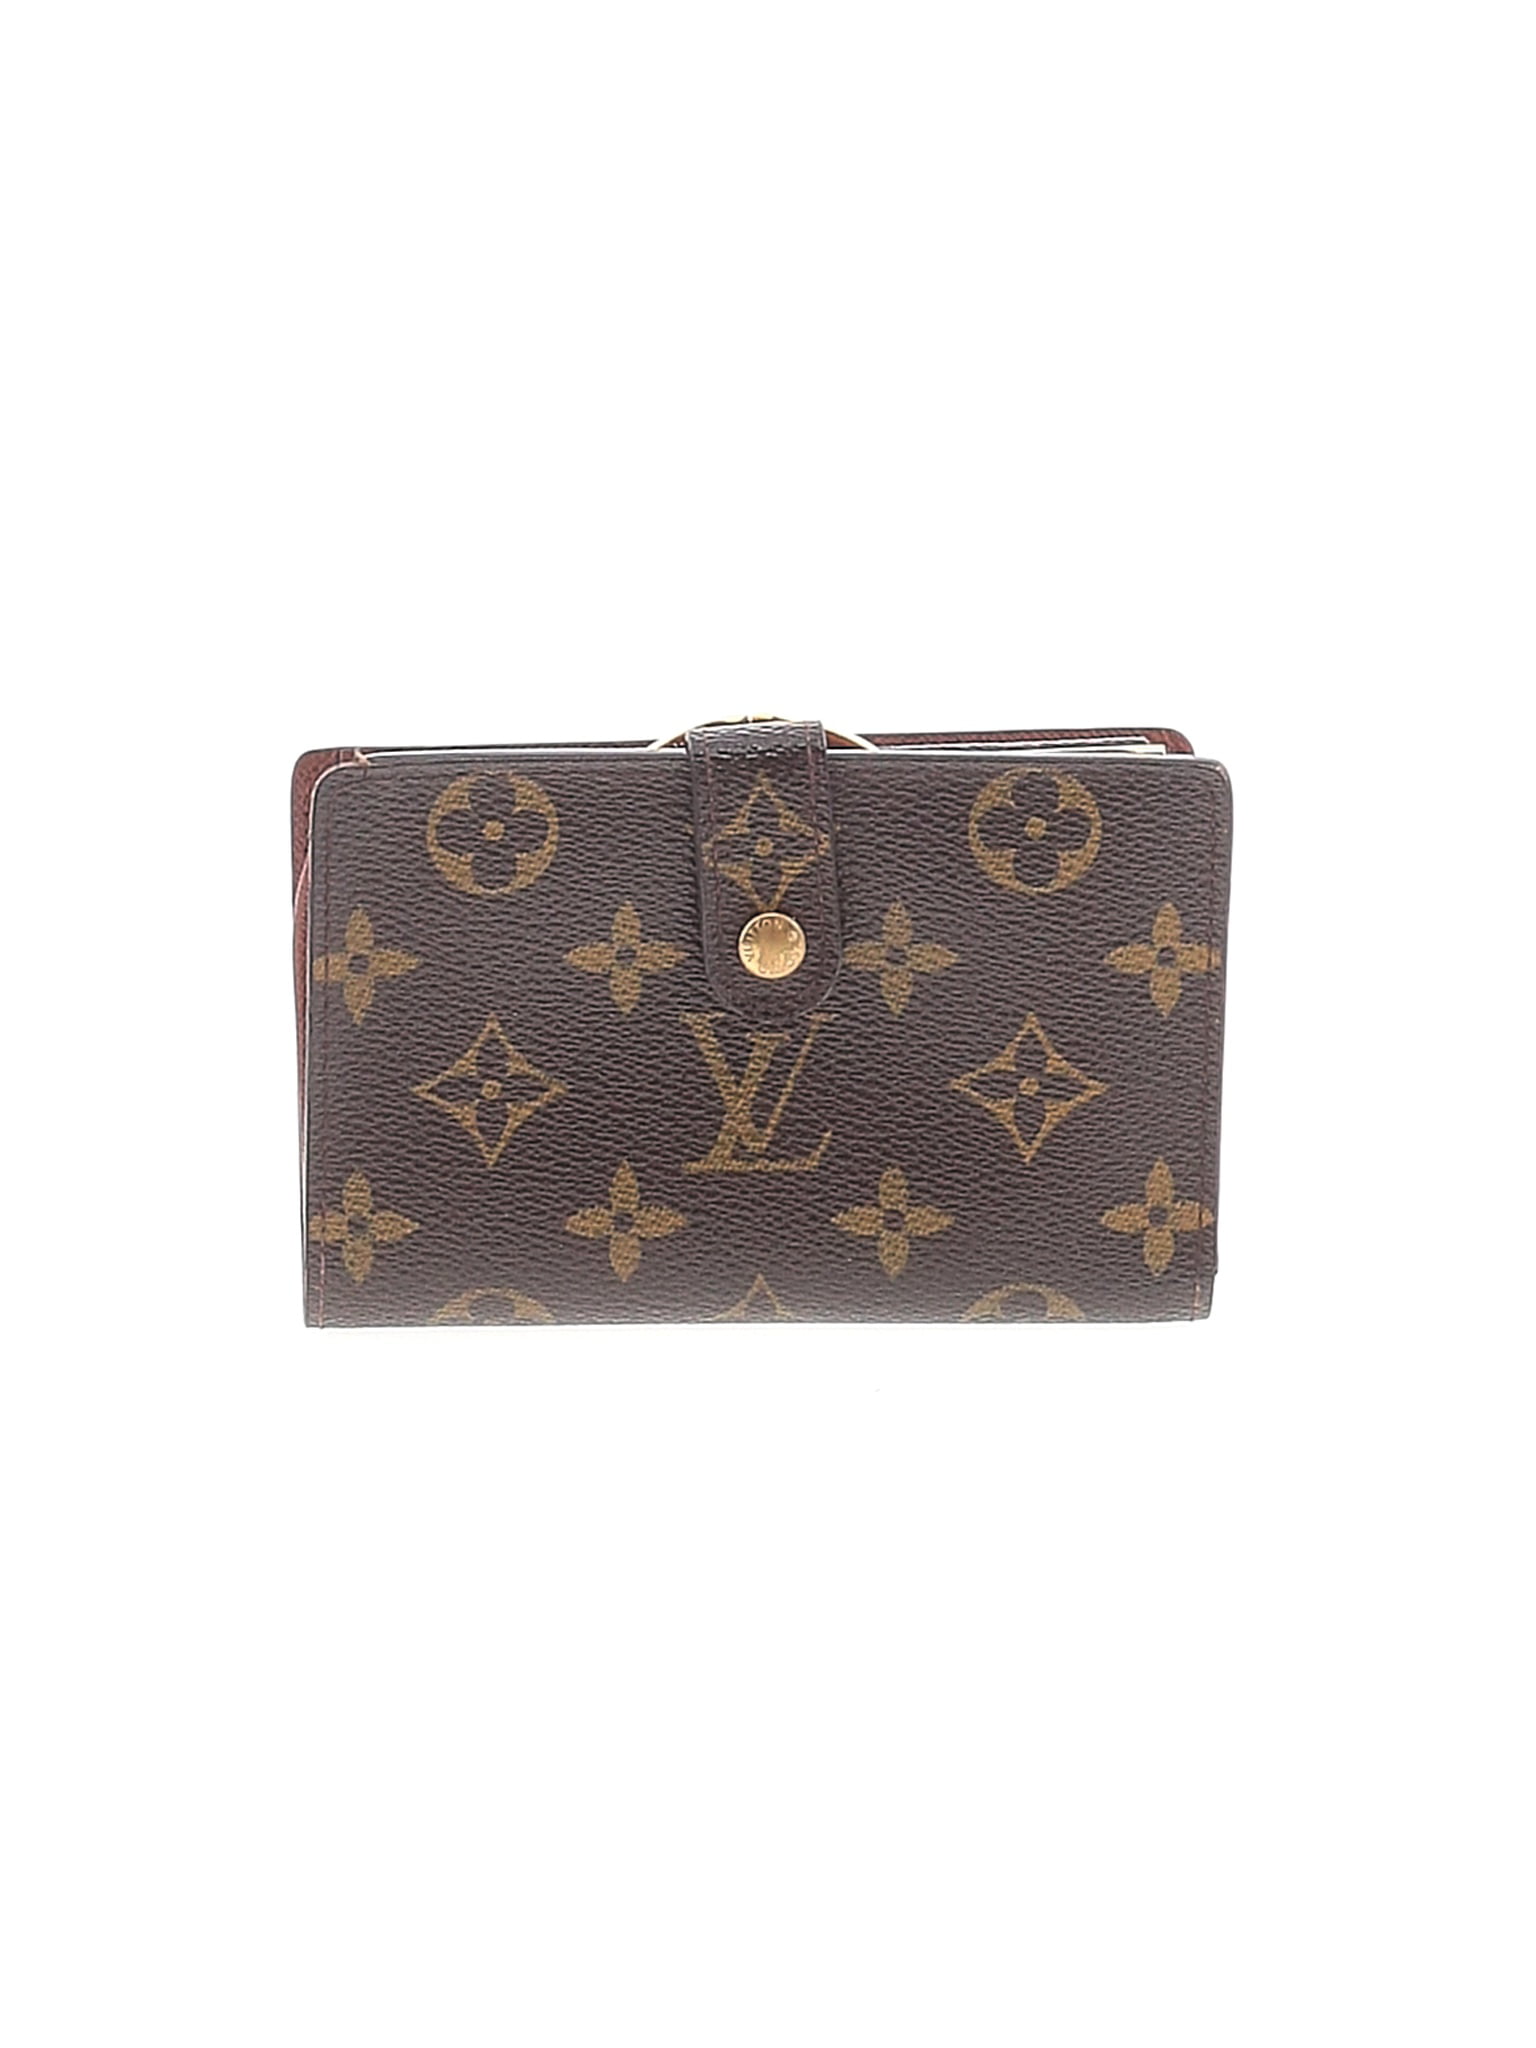 Louis Vuitton - Pre-Owned Louis Vuitton Women&#39;s One Size Fits All Wallet - www.waterandnature.org - www.waterandnature.org